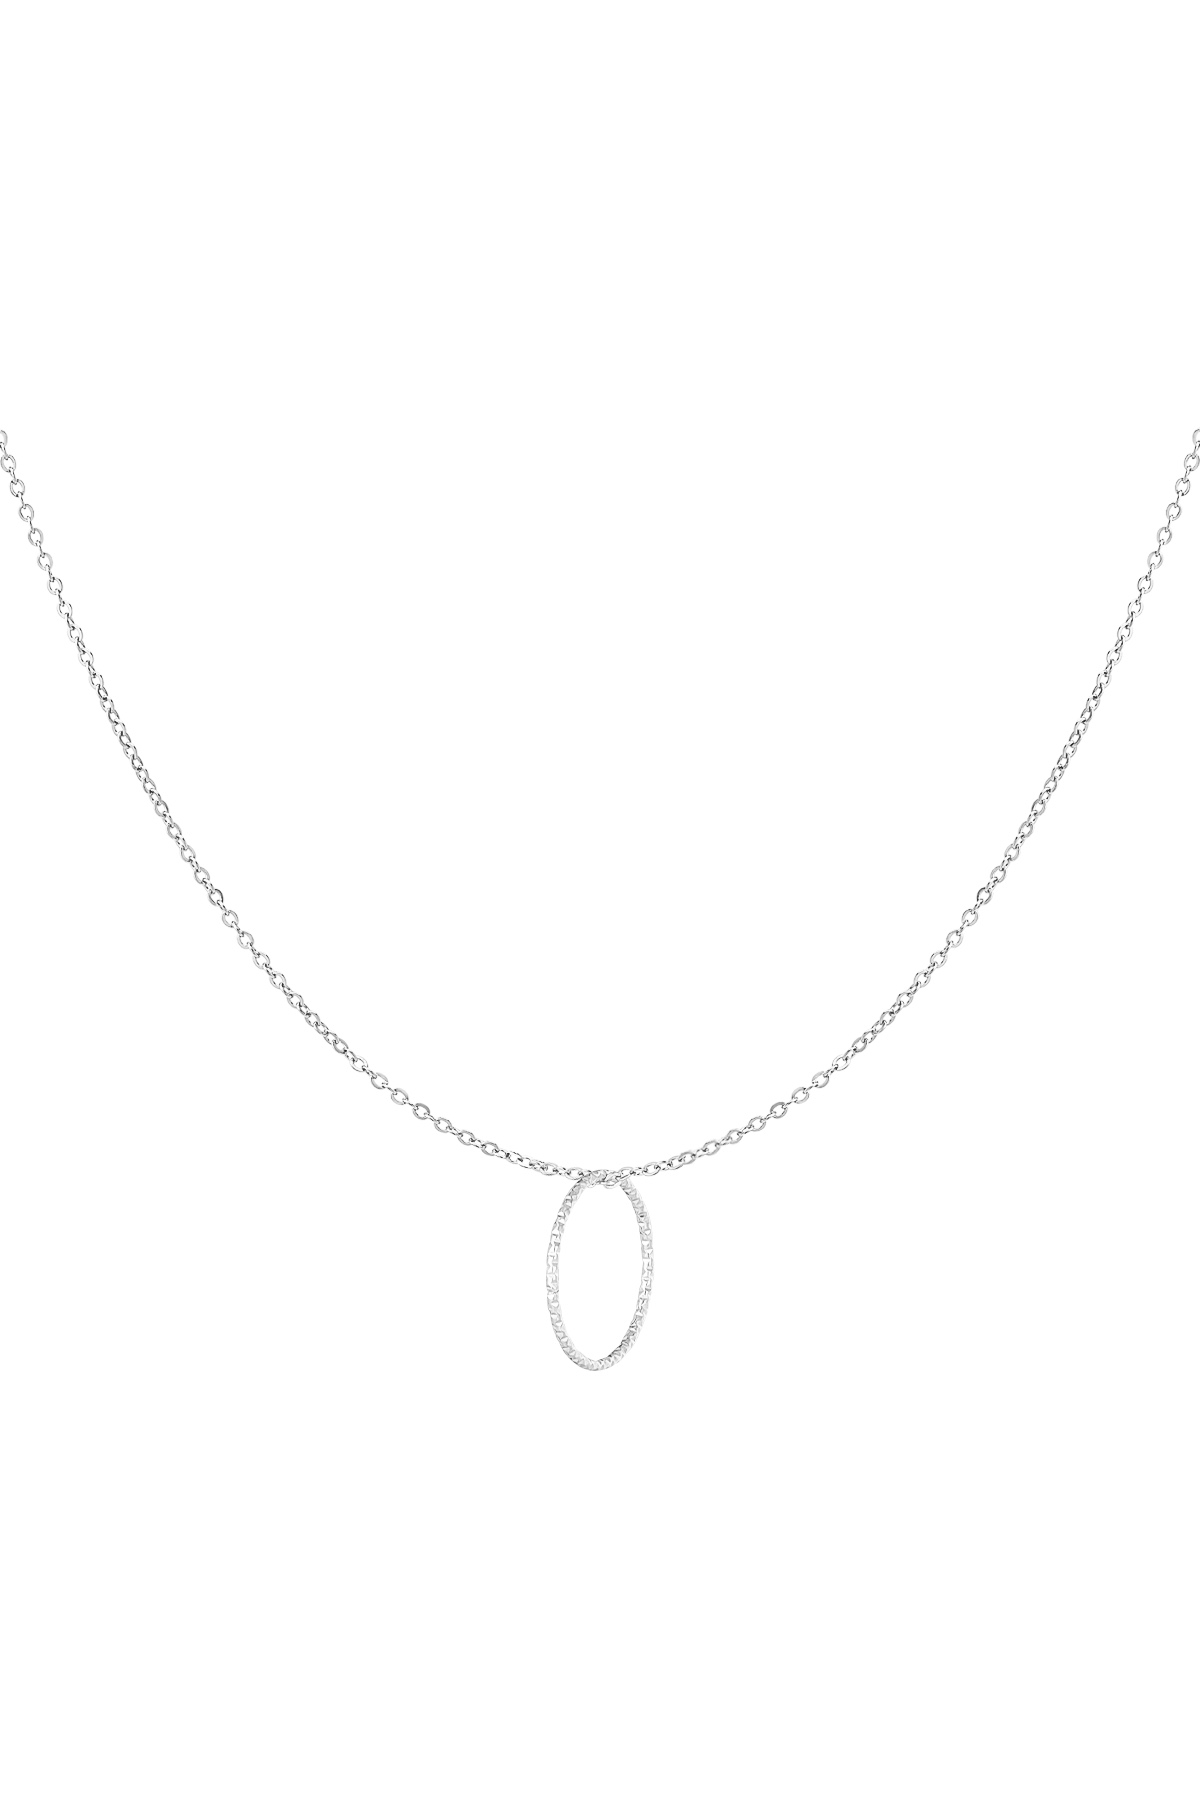 Basic necklace with round charm - silver h5 